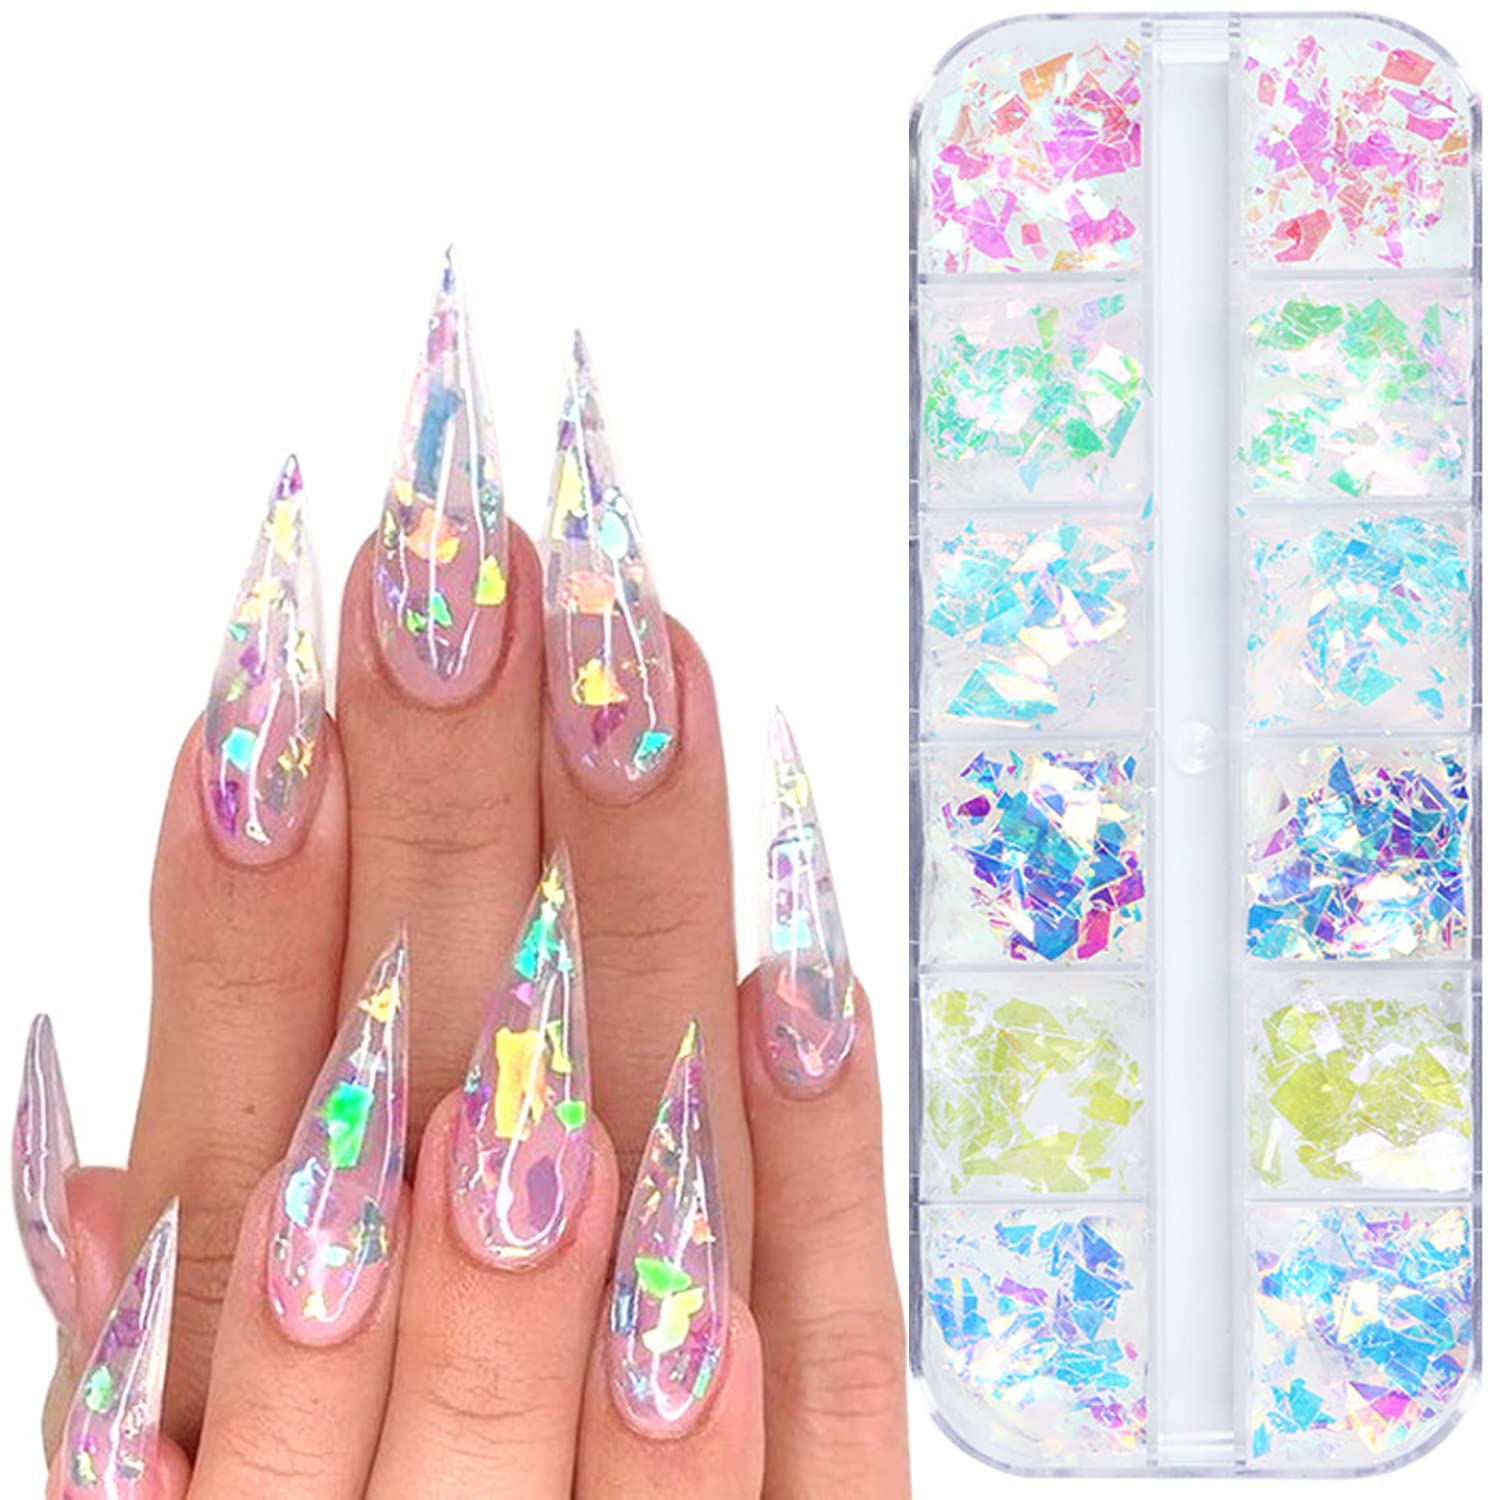 6 Can Holographic Nail Art Sequins,6 Color Mermaid Nail Flakes,Hexagon  Chunky Nail Glitter Sequin For DIY Nail Art Decoration Phone Case Decoration